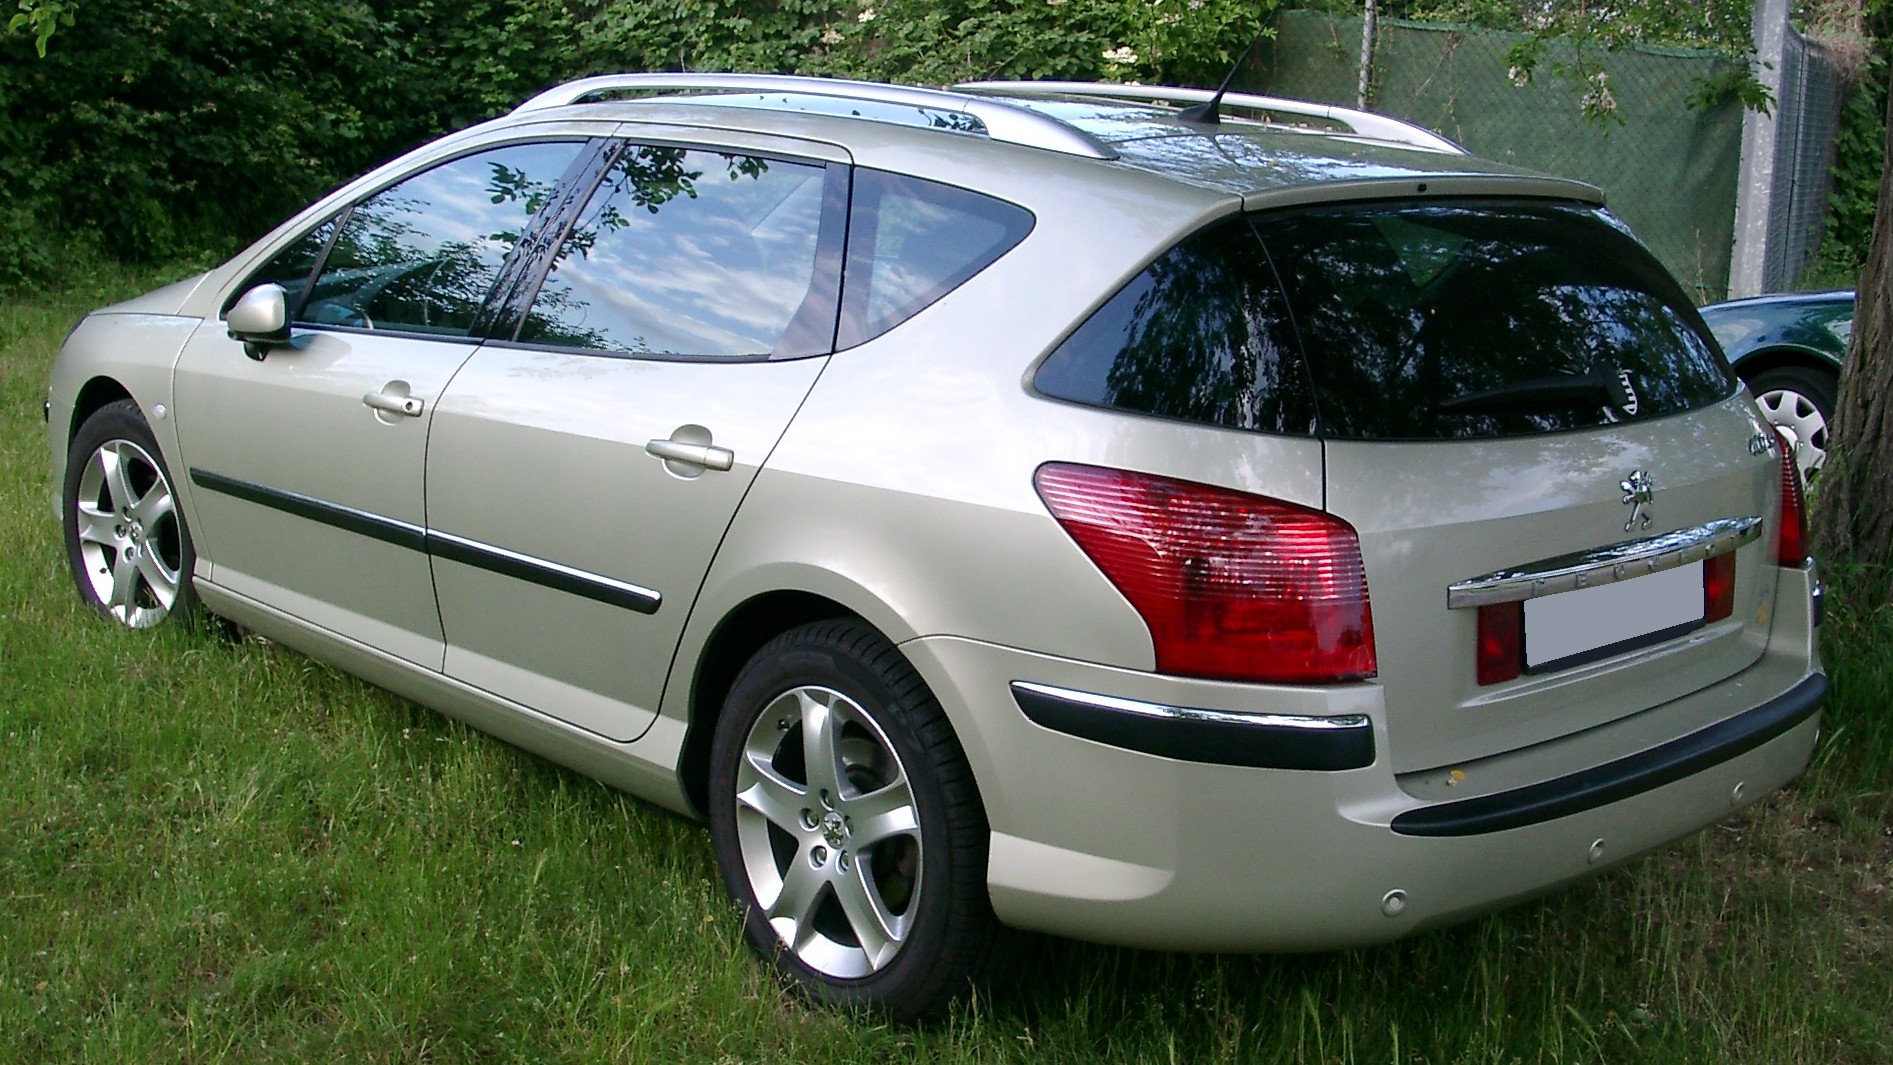 Peugeot 407 SW technical details, history, photos on